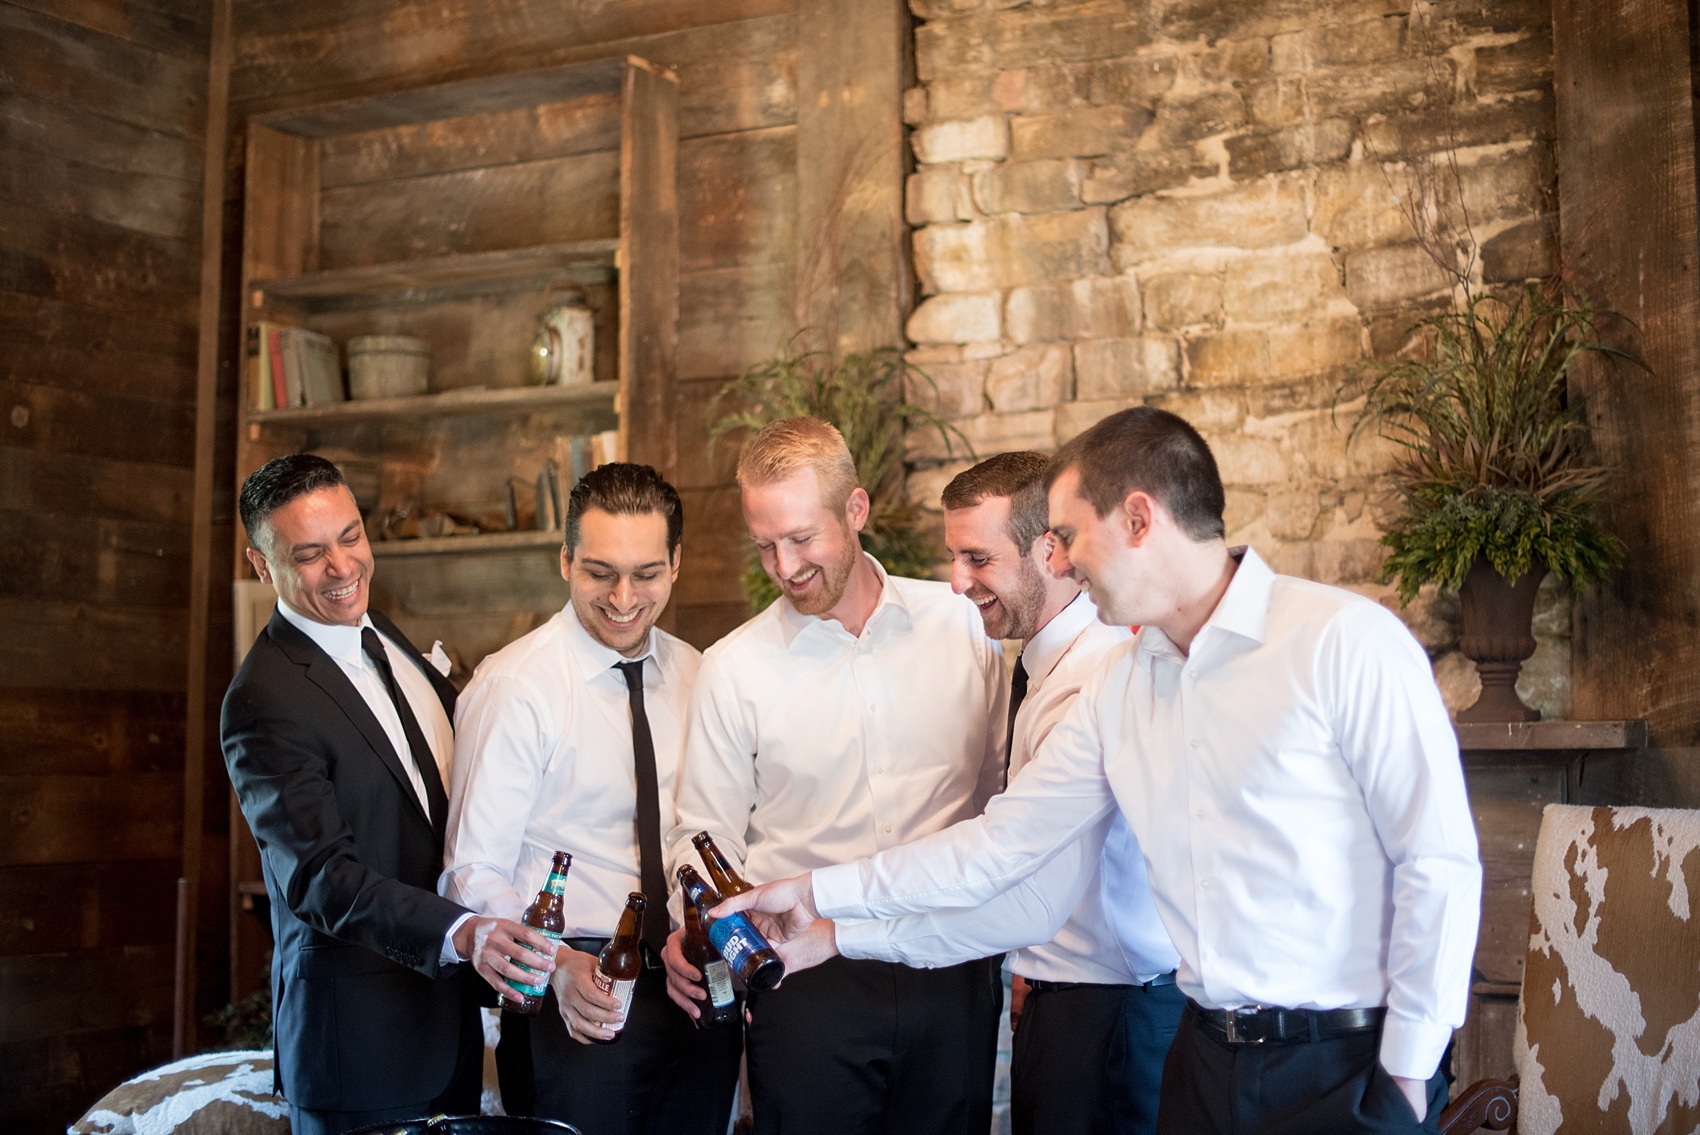 The Sutherland Wedding Photos by Mikkel Paige Photography. Picture of the groomsmen getting ready in a rustic wooden cabin.